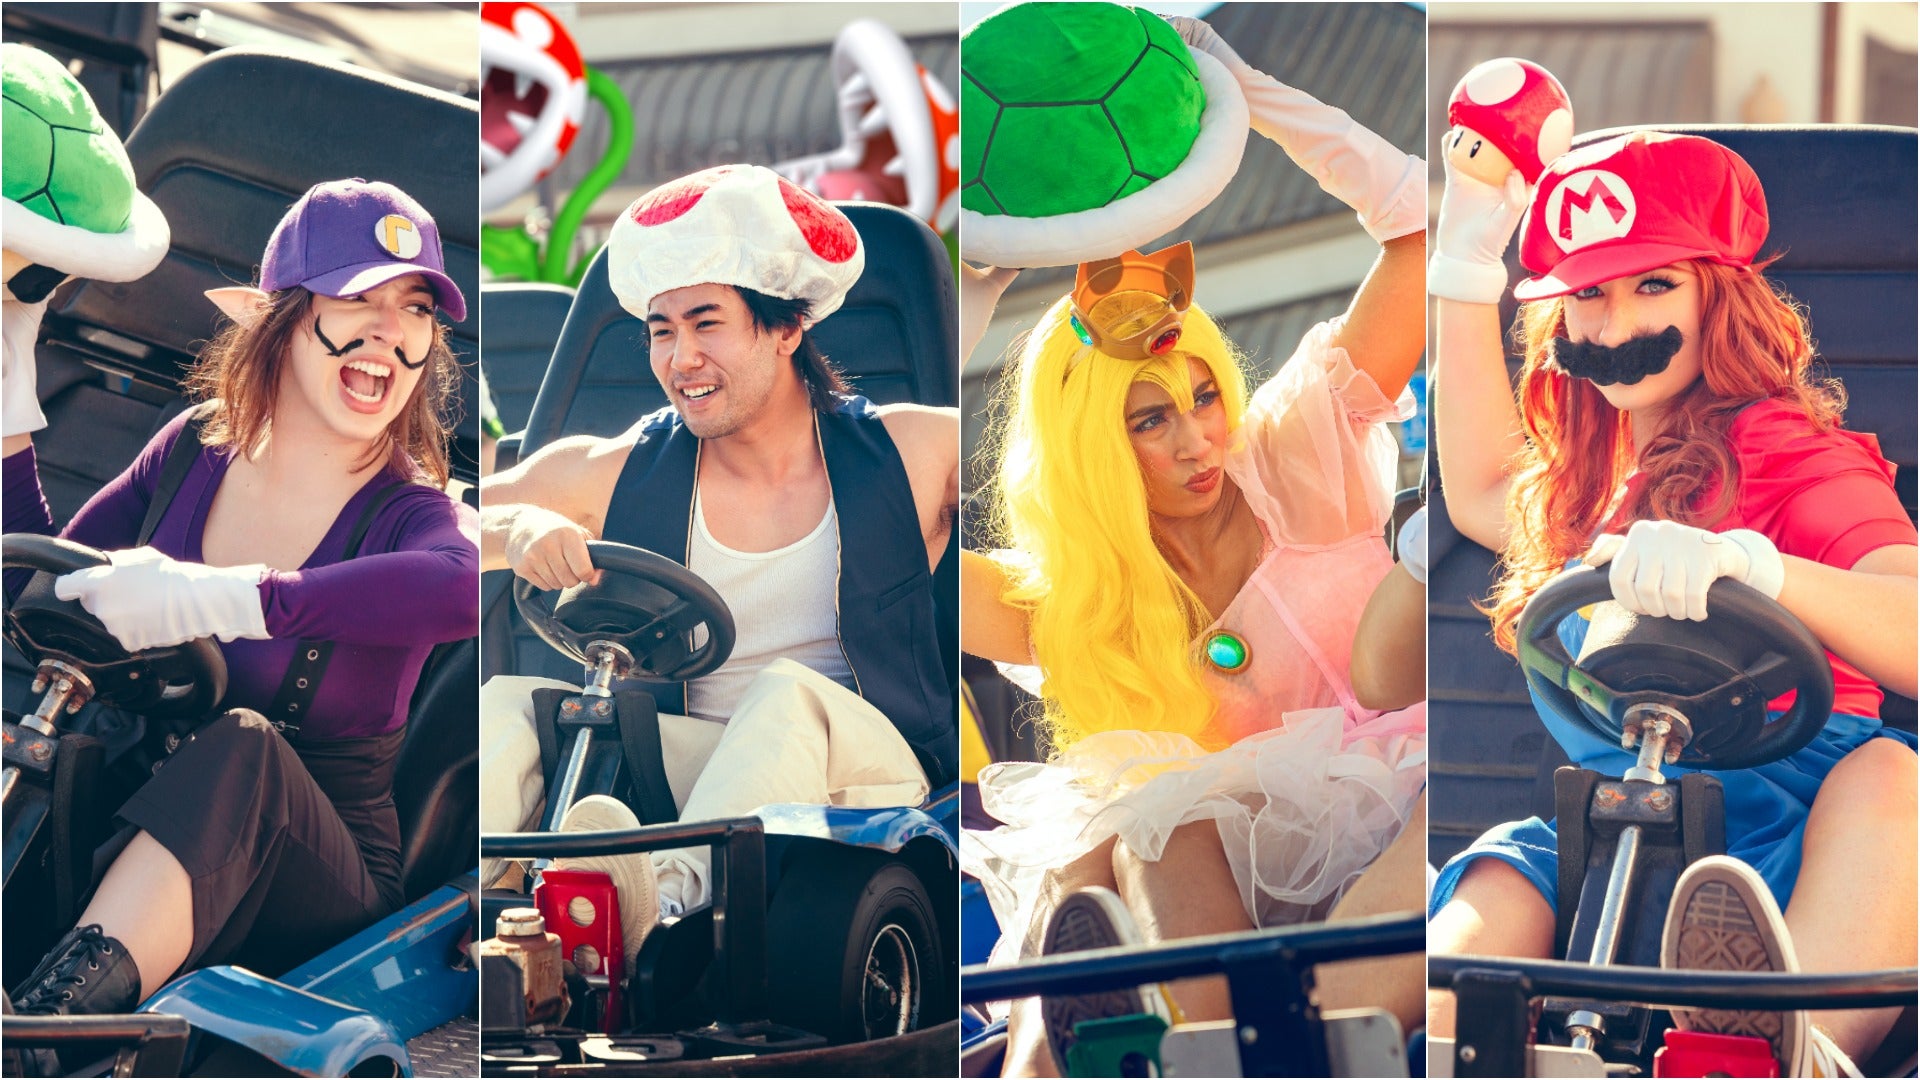 Mario Kart Recreated In Real Life